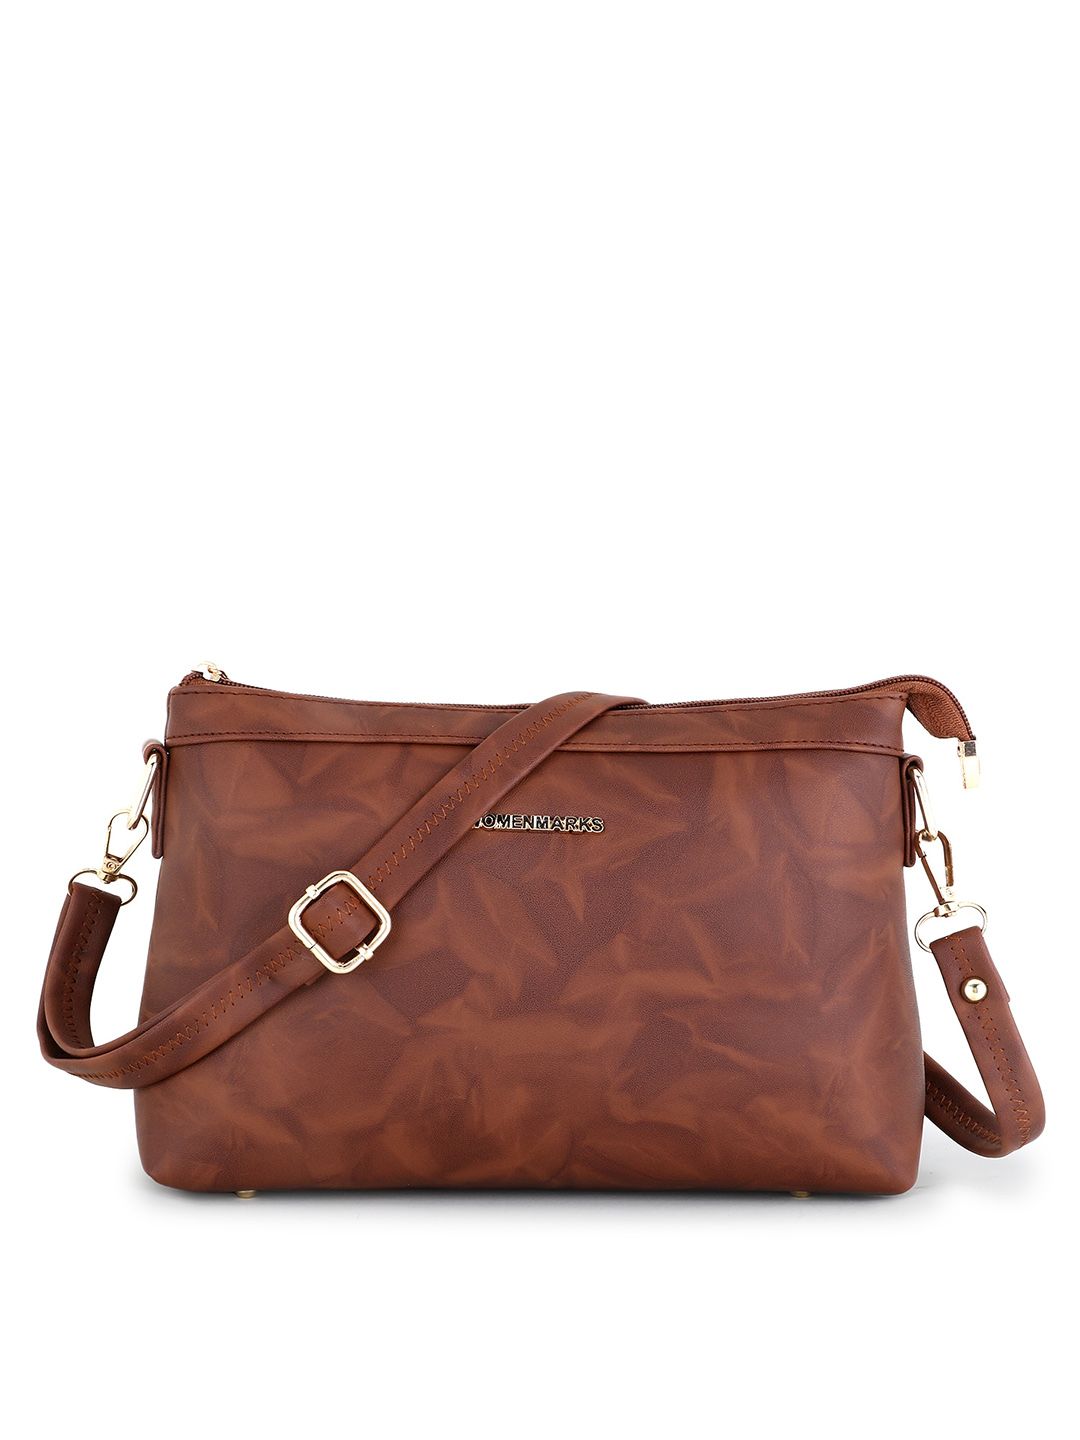 WOMEN MARKS Coffee Brown PU Structured Sling Bag with Fringed Price in India